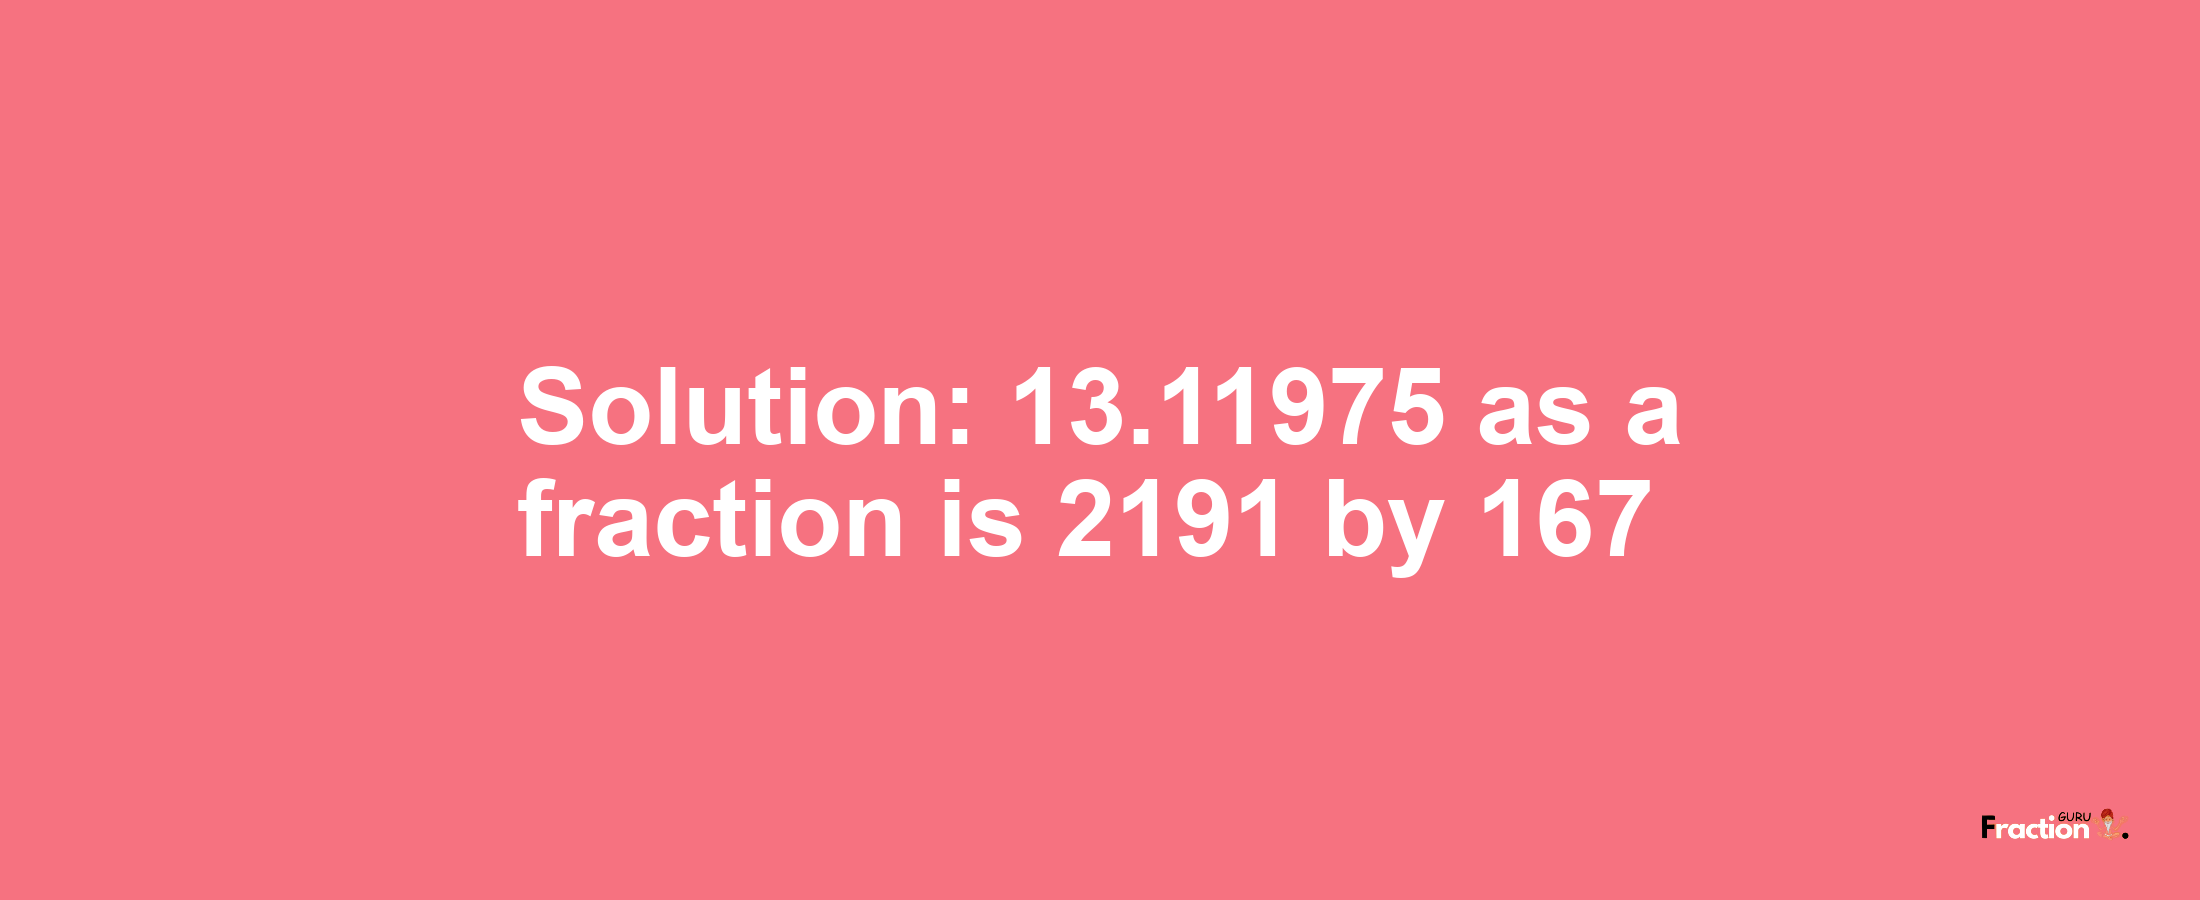 Solution:13.11975 as a fraction is 2191/167